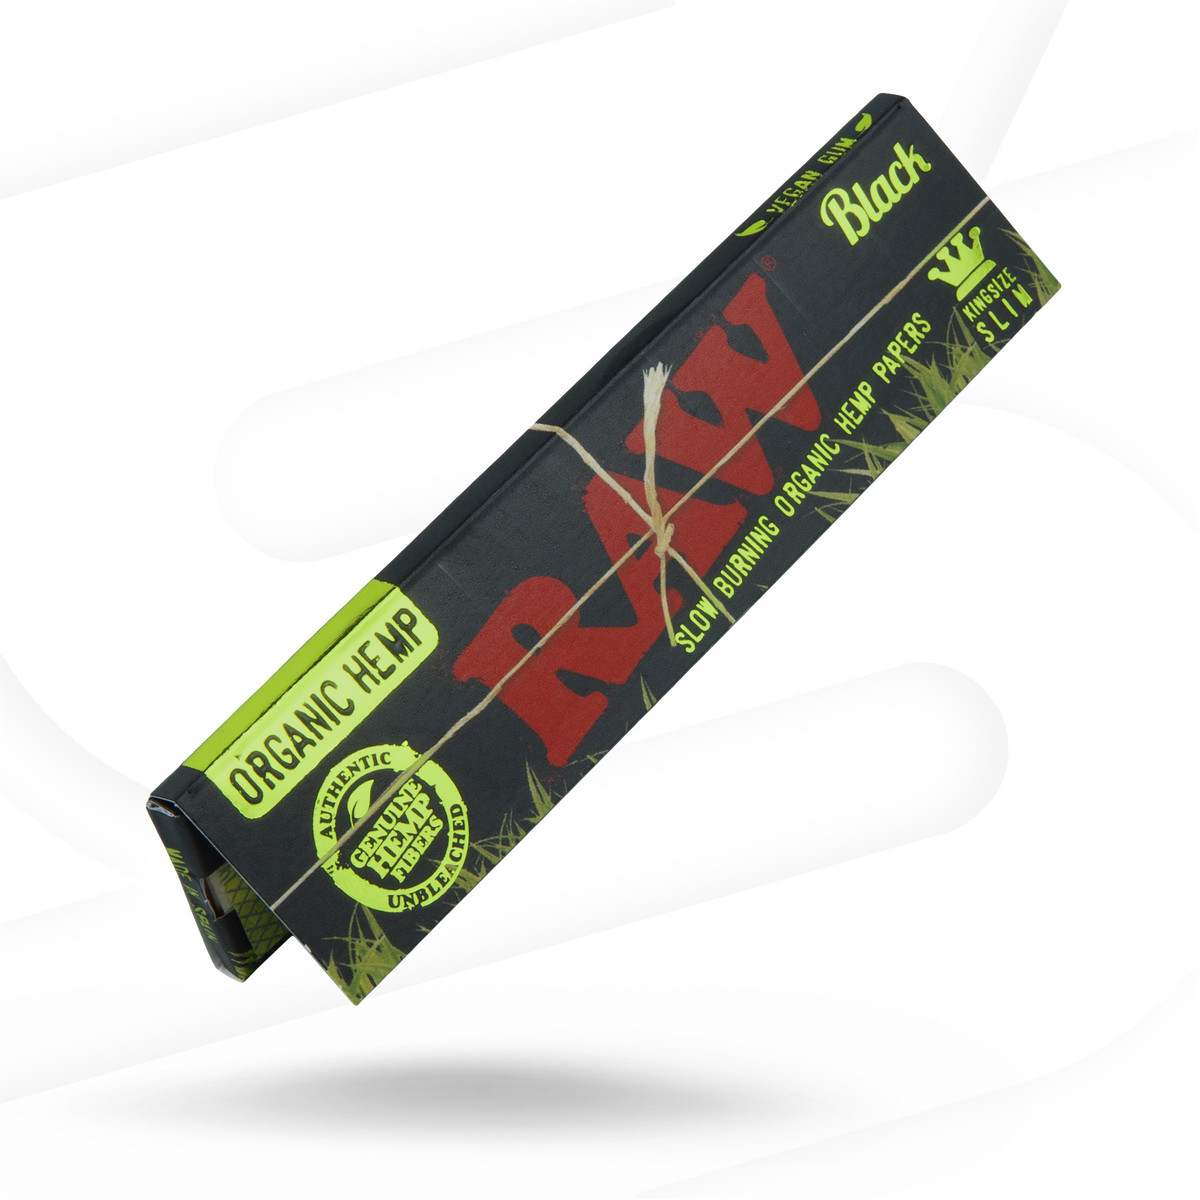 RAW Black King Size Slim Organic Hemp Rolling Papers Rolling Papers esd-official